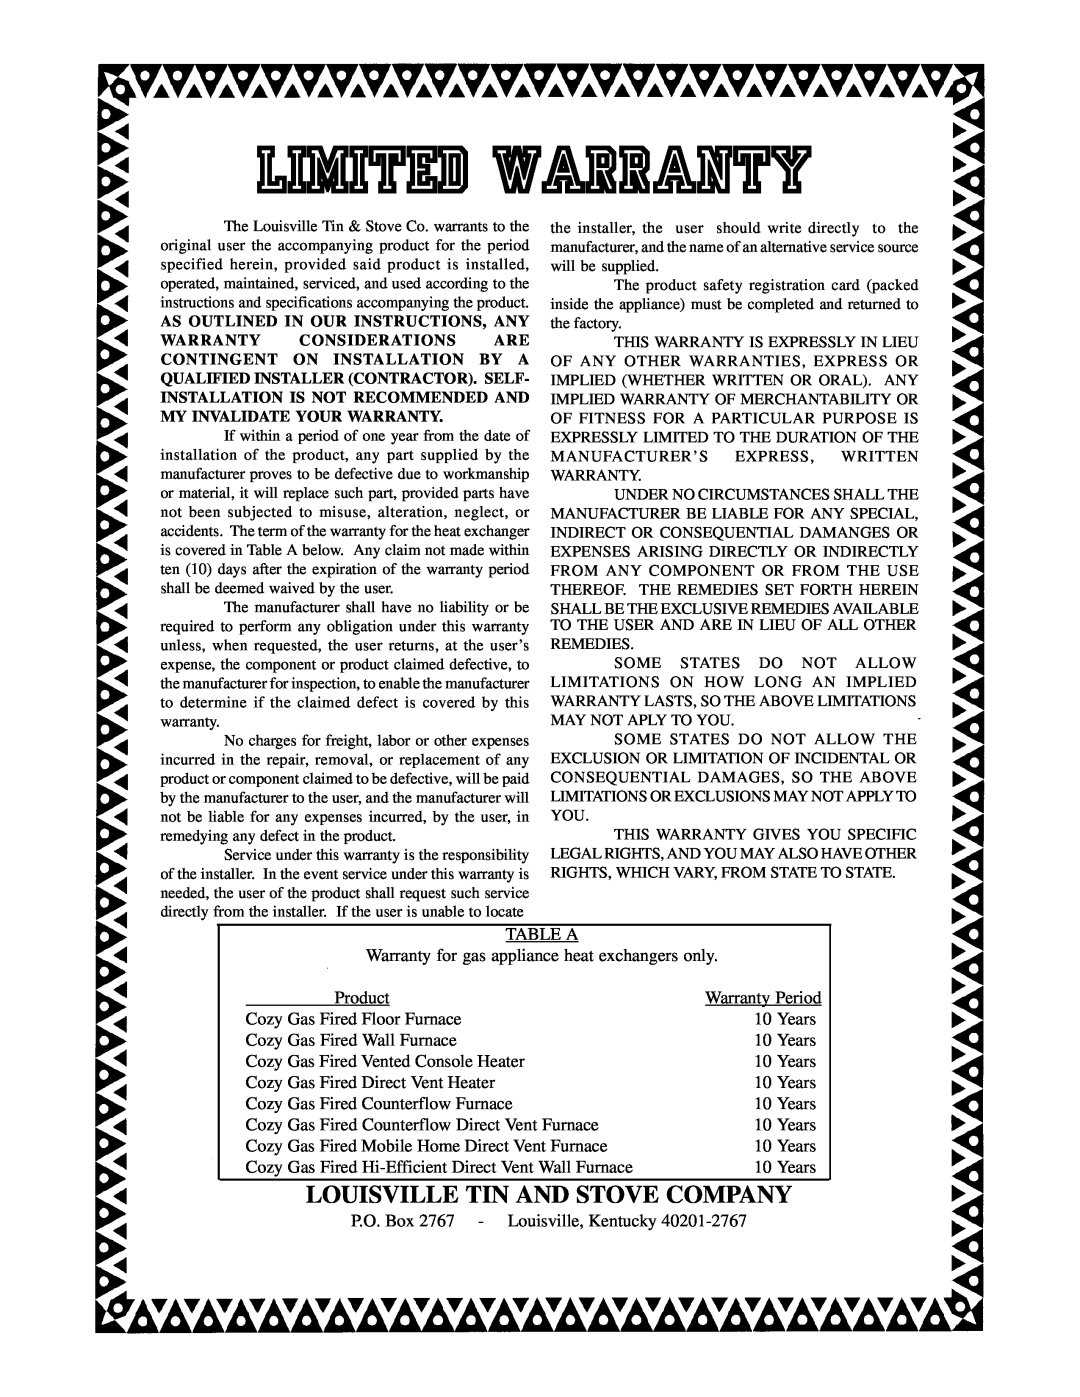 Louisville Tin and Stove HEDV403, HEDV404 warranty Louisville Tin And Stove Company, Limited Warranty 